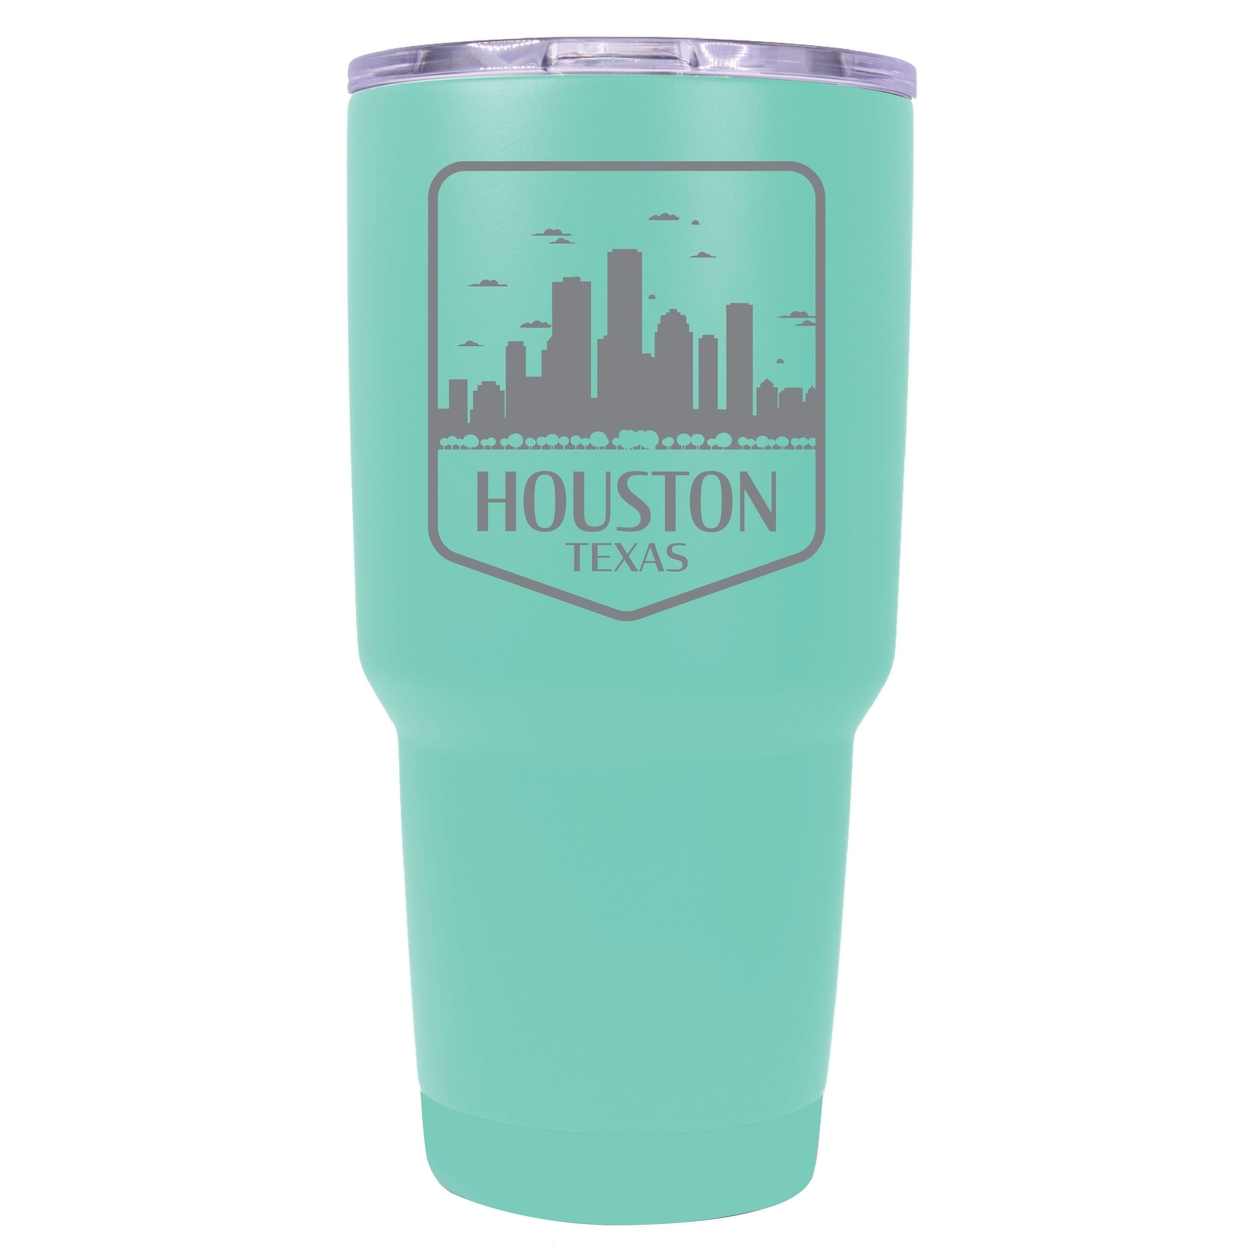 Houston Texas Souvenir 24 Oz Engraved Insulated Stainless Steel Tumbler - Red,,4-Pack